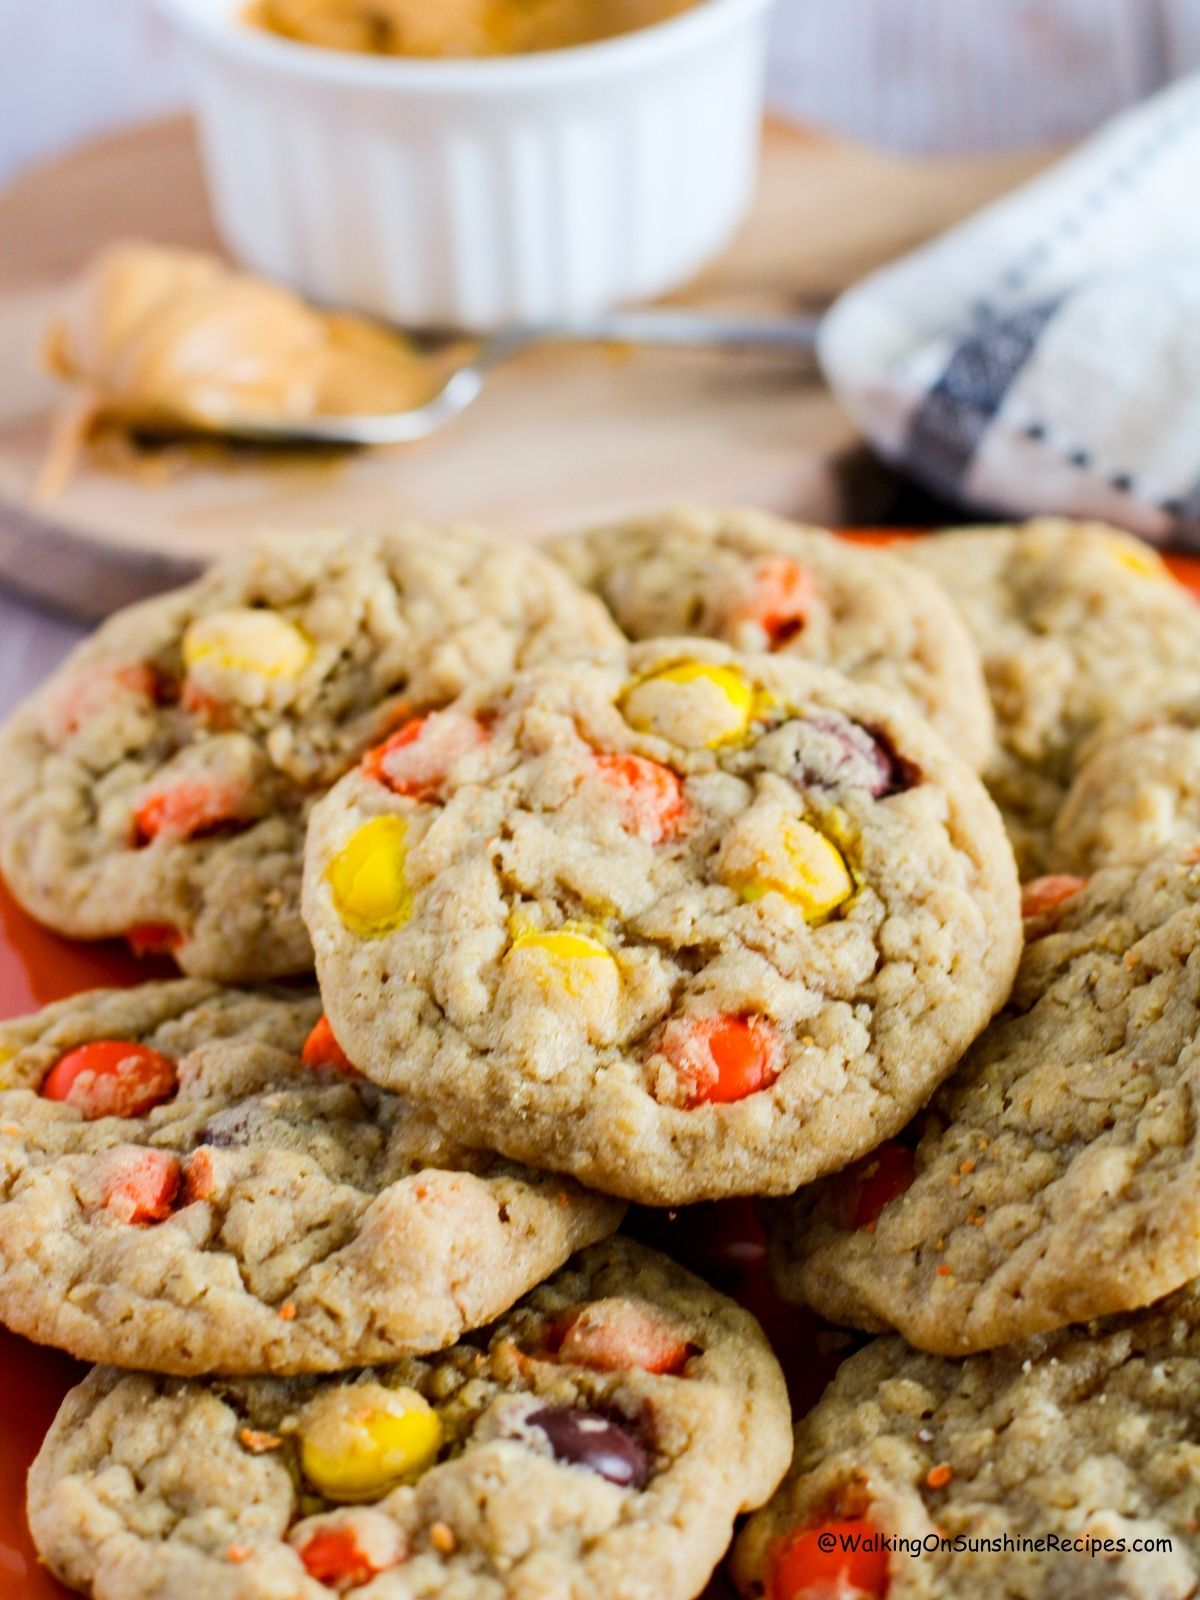 Oatmeal cookies with Reese's Pieces candies.